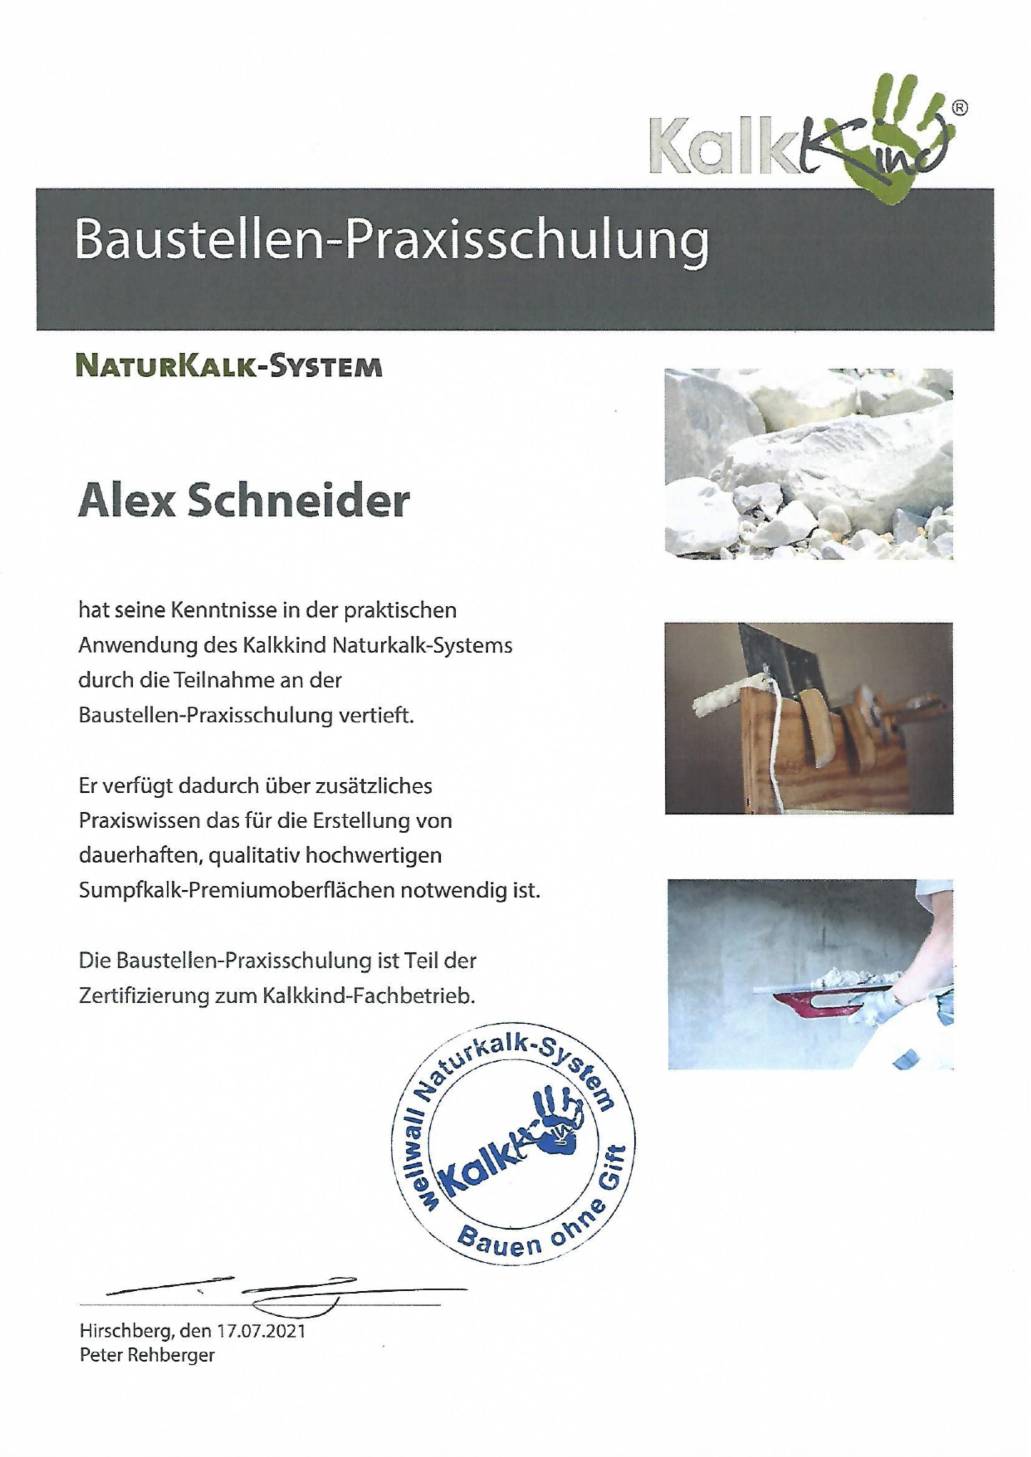 KalkKind Praxischulung_pages-to-jpg-0001